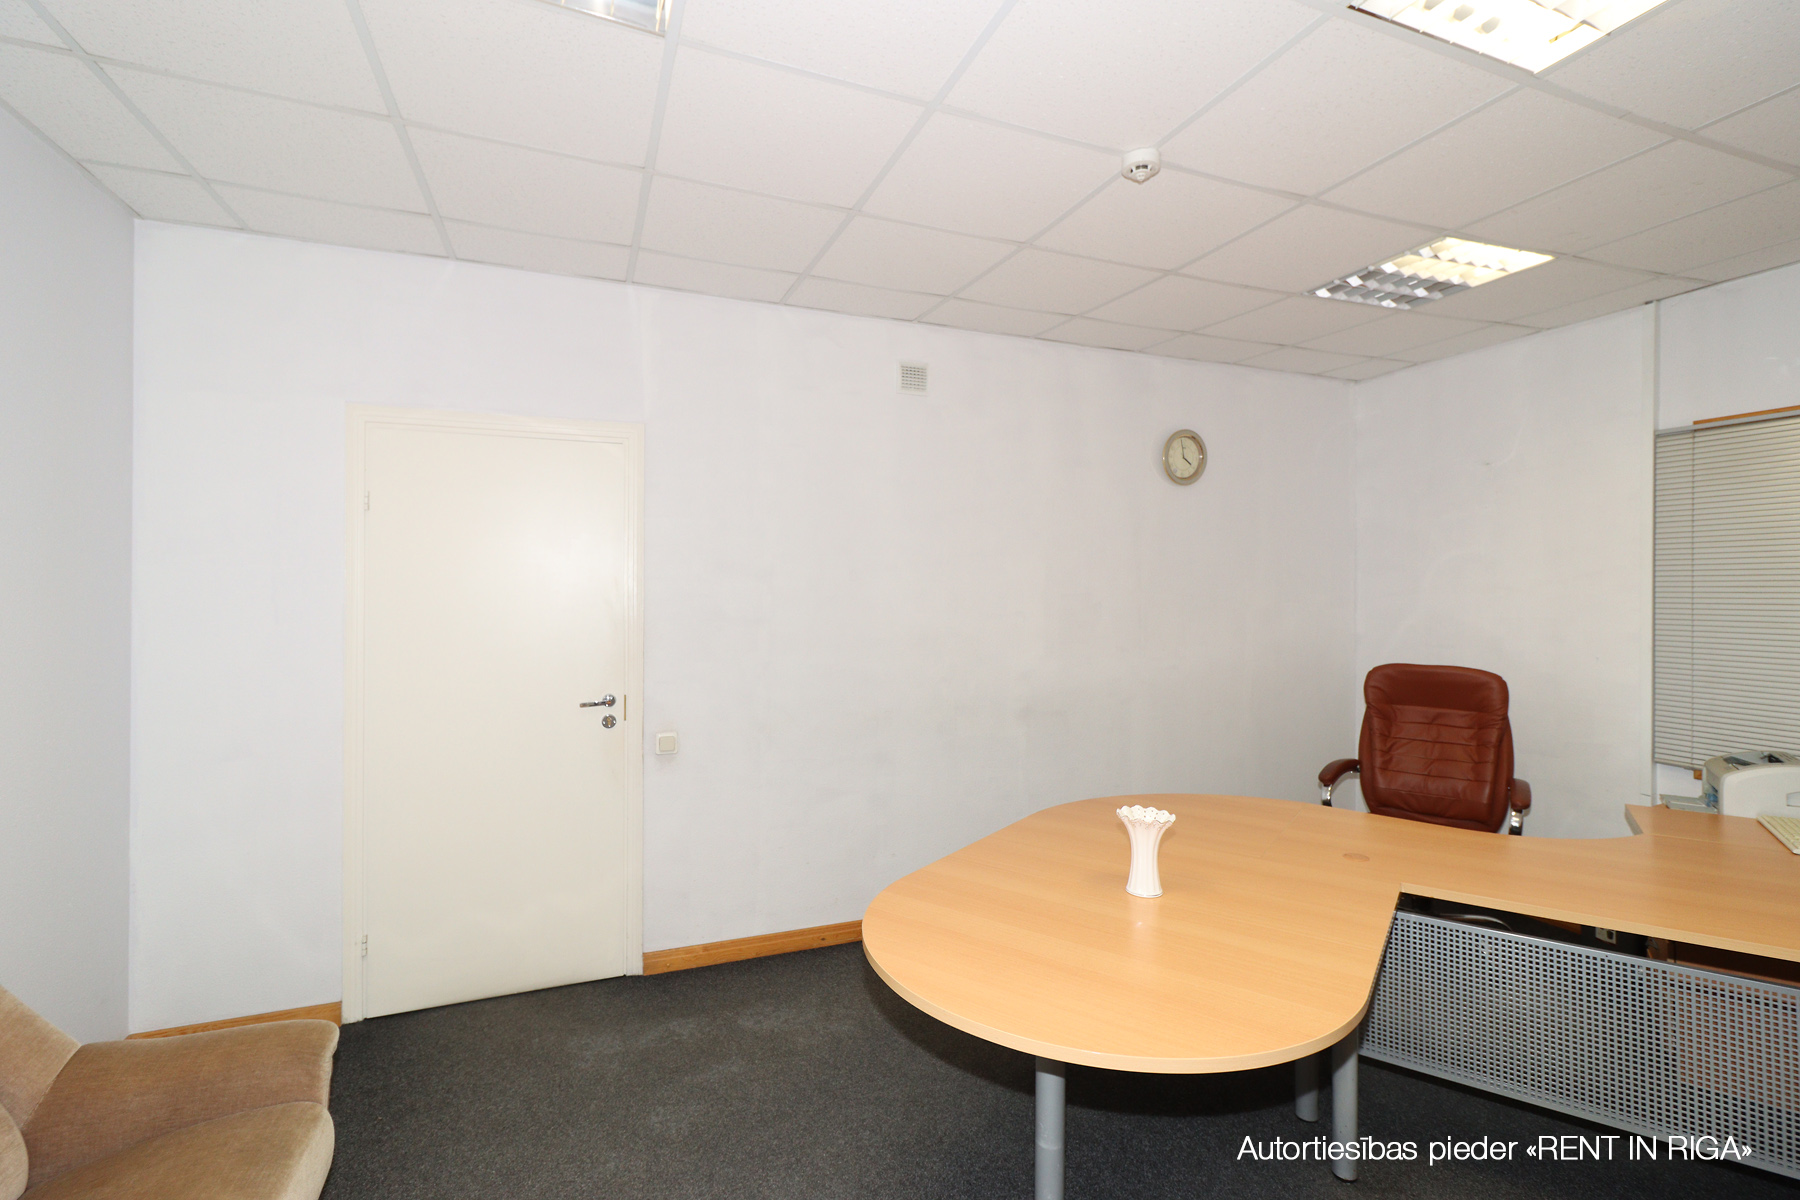 Office for rent, Piedrujas street - Image 1